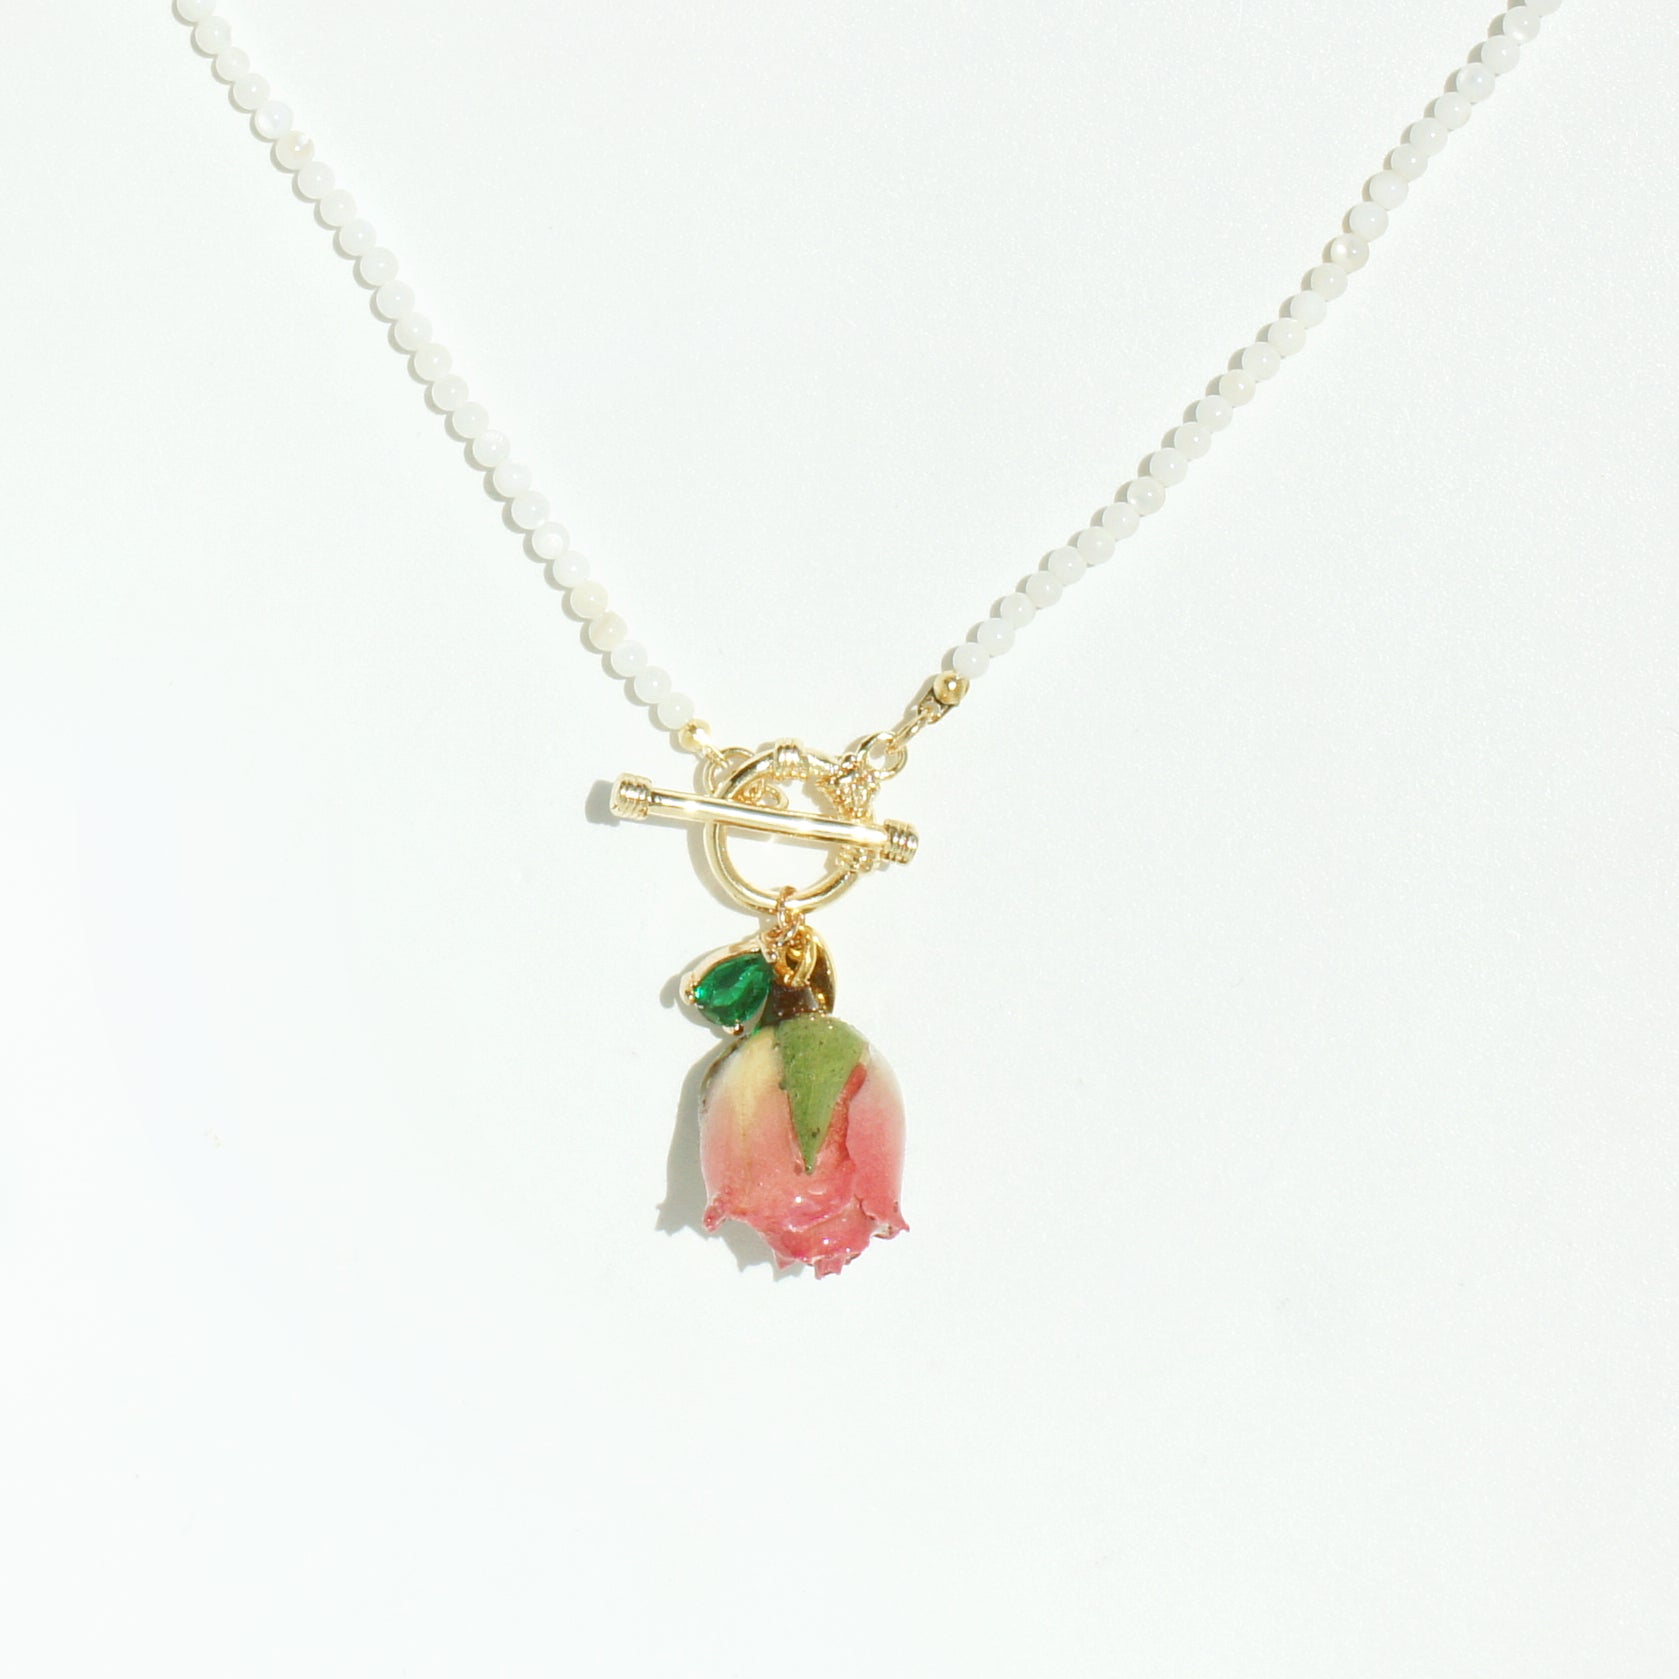 *REAL FLOWER* Bella Rosa Mother of Pearl Necklace with Pink Rosebud and Green Crystal